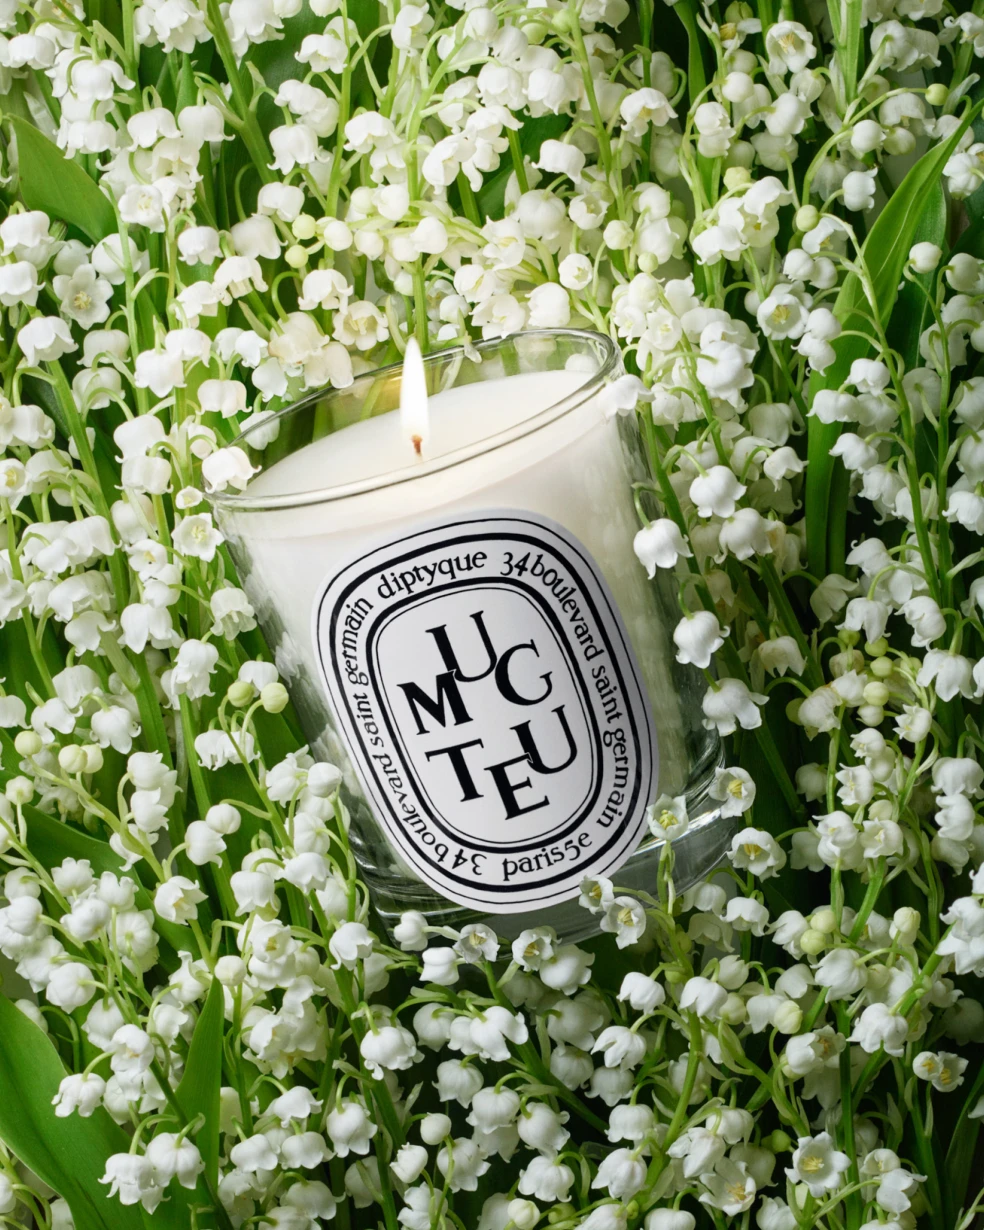 Candle of the Month: Muguet (Lily of the Valley)